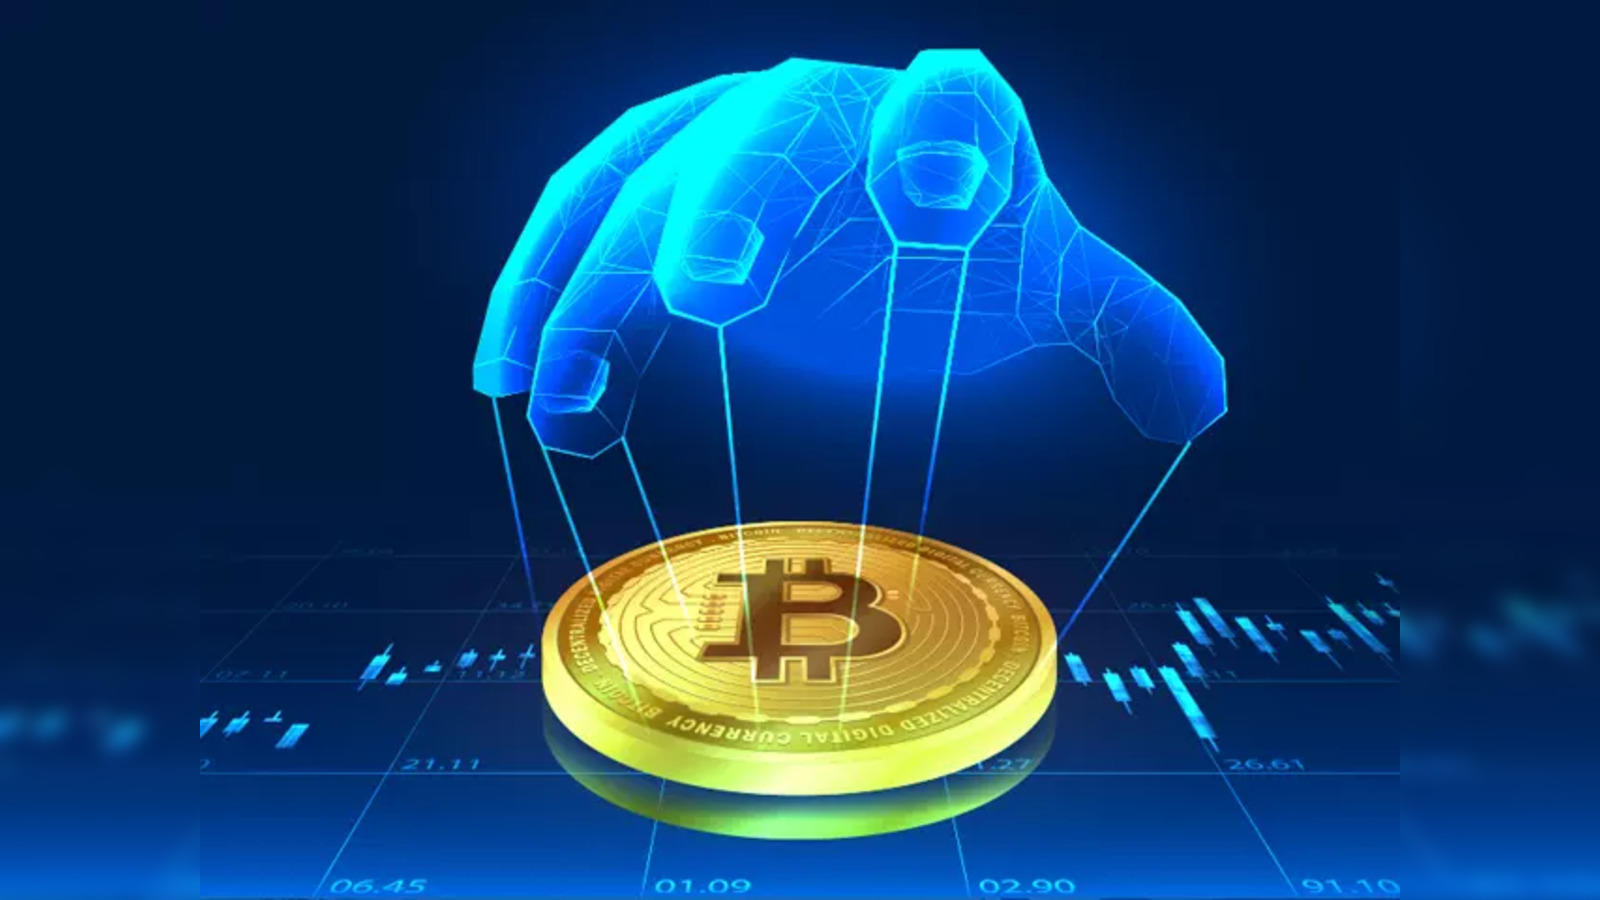 Cryptocurrency is gaining worldwide acceptance, here are 5 reasons why - The Economic Times